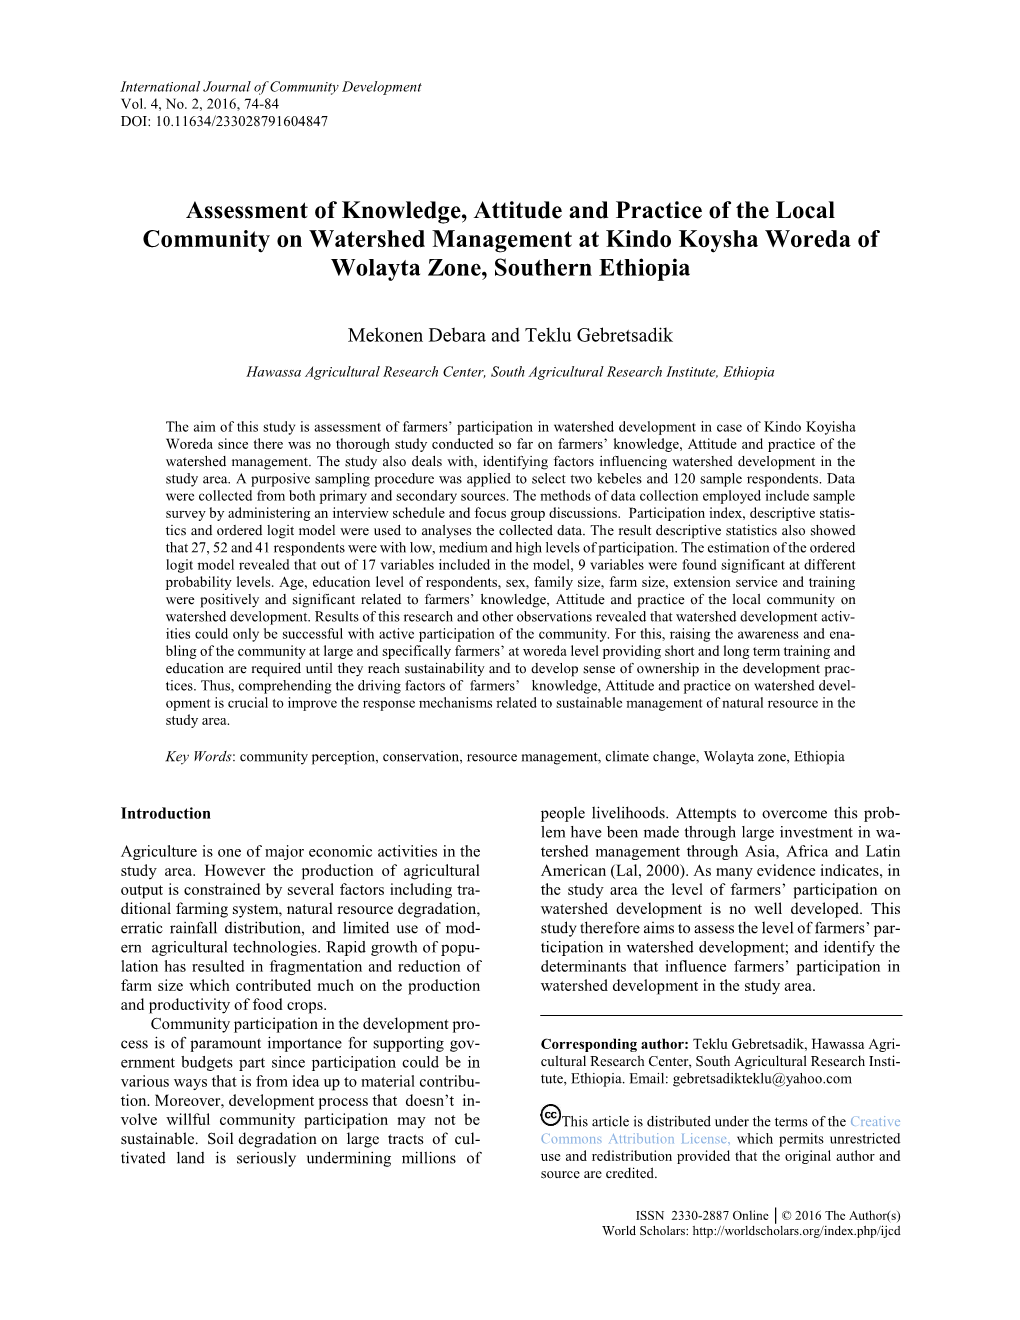 Assessment of Knowledge, Attitude and Practice of the Local Community on Watershed Management at Kindo Koysha Woreda of Wolayta Zone, Southern Ethiopia